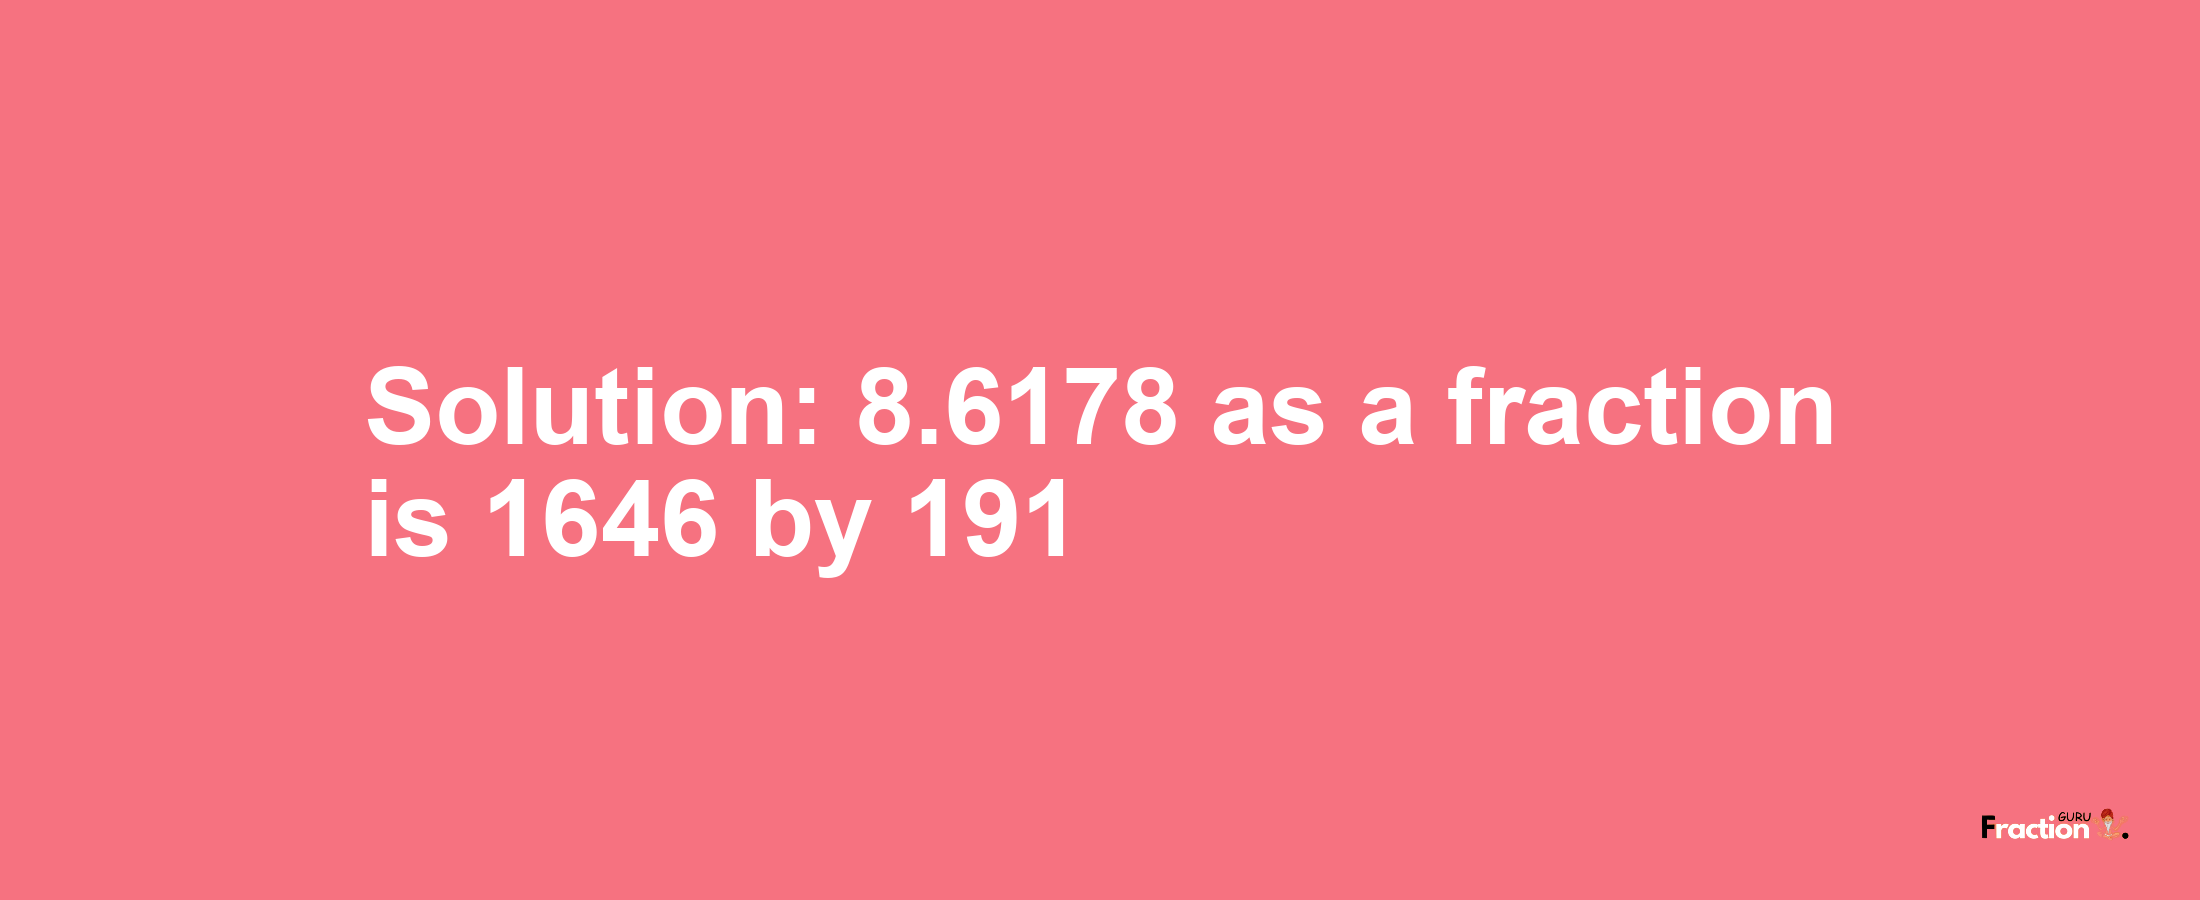 Solution:8.6178 as a fraction is 1646/191